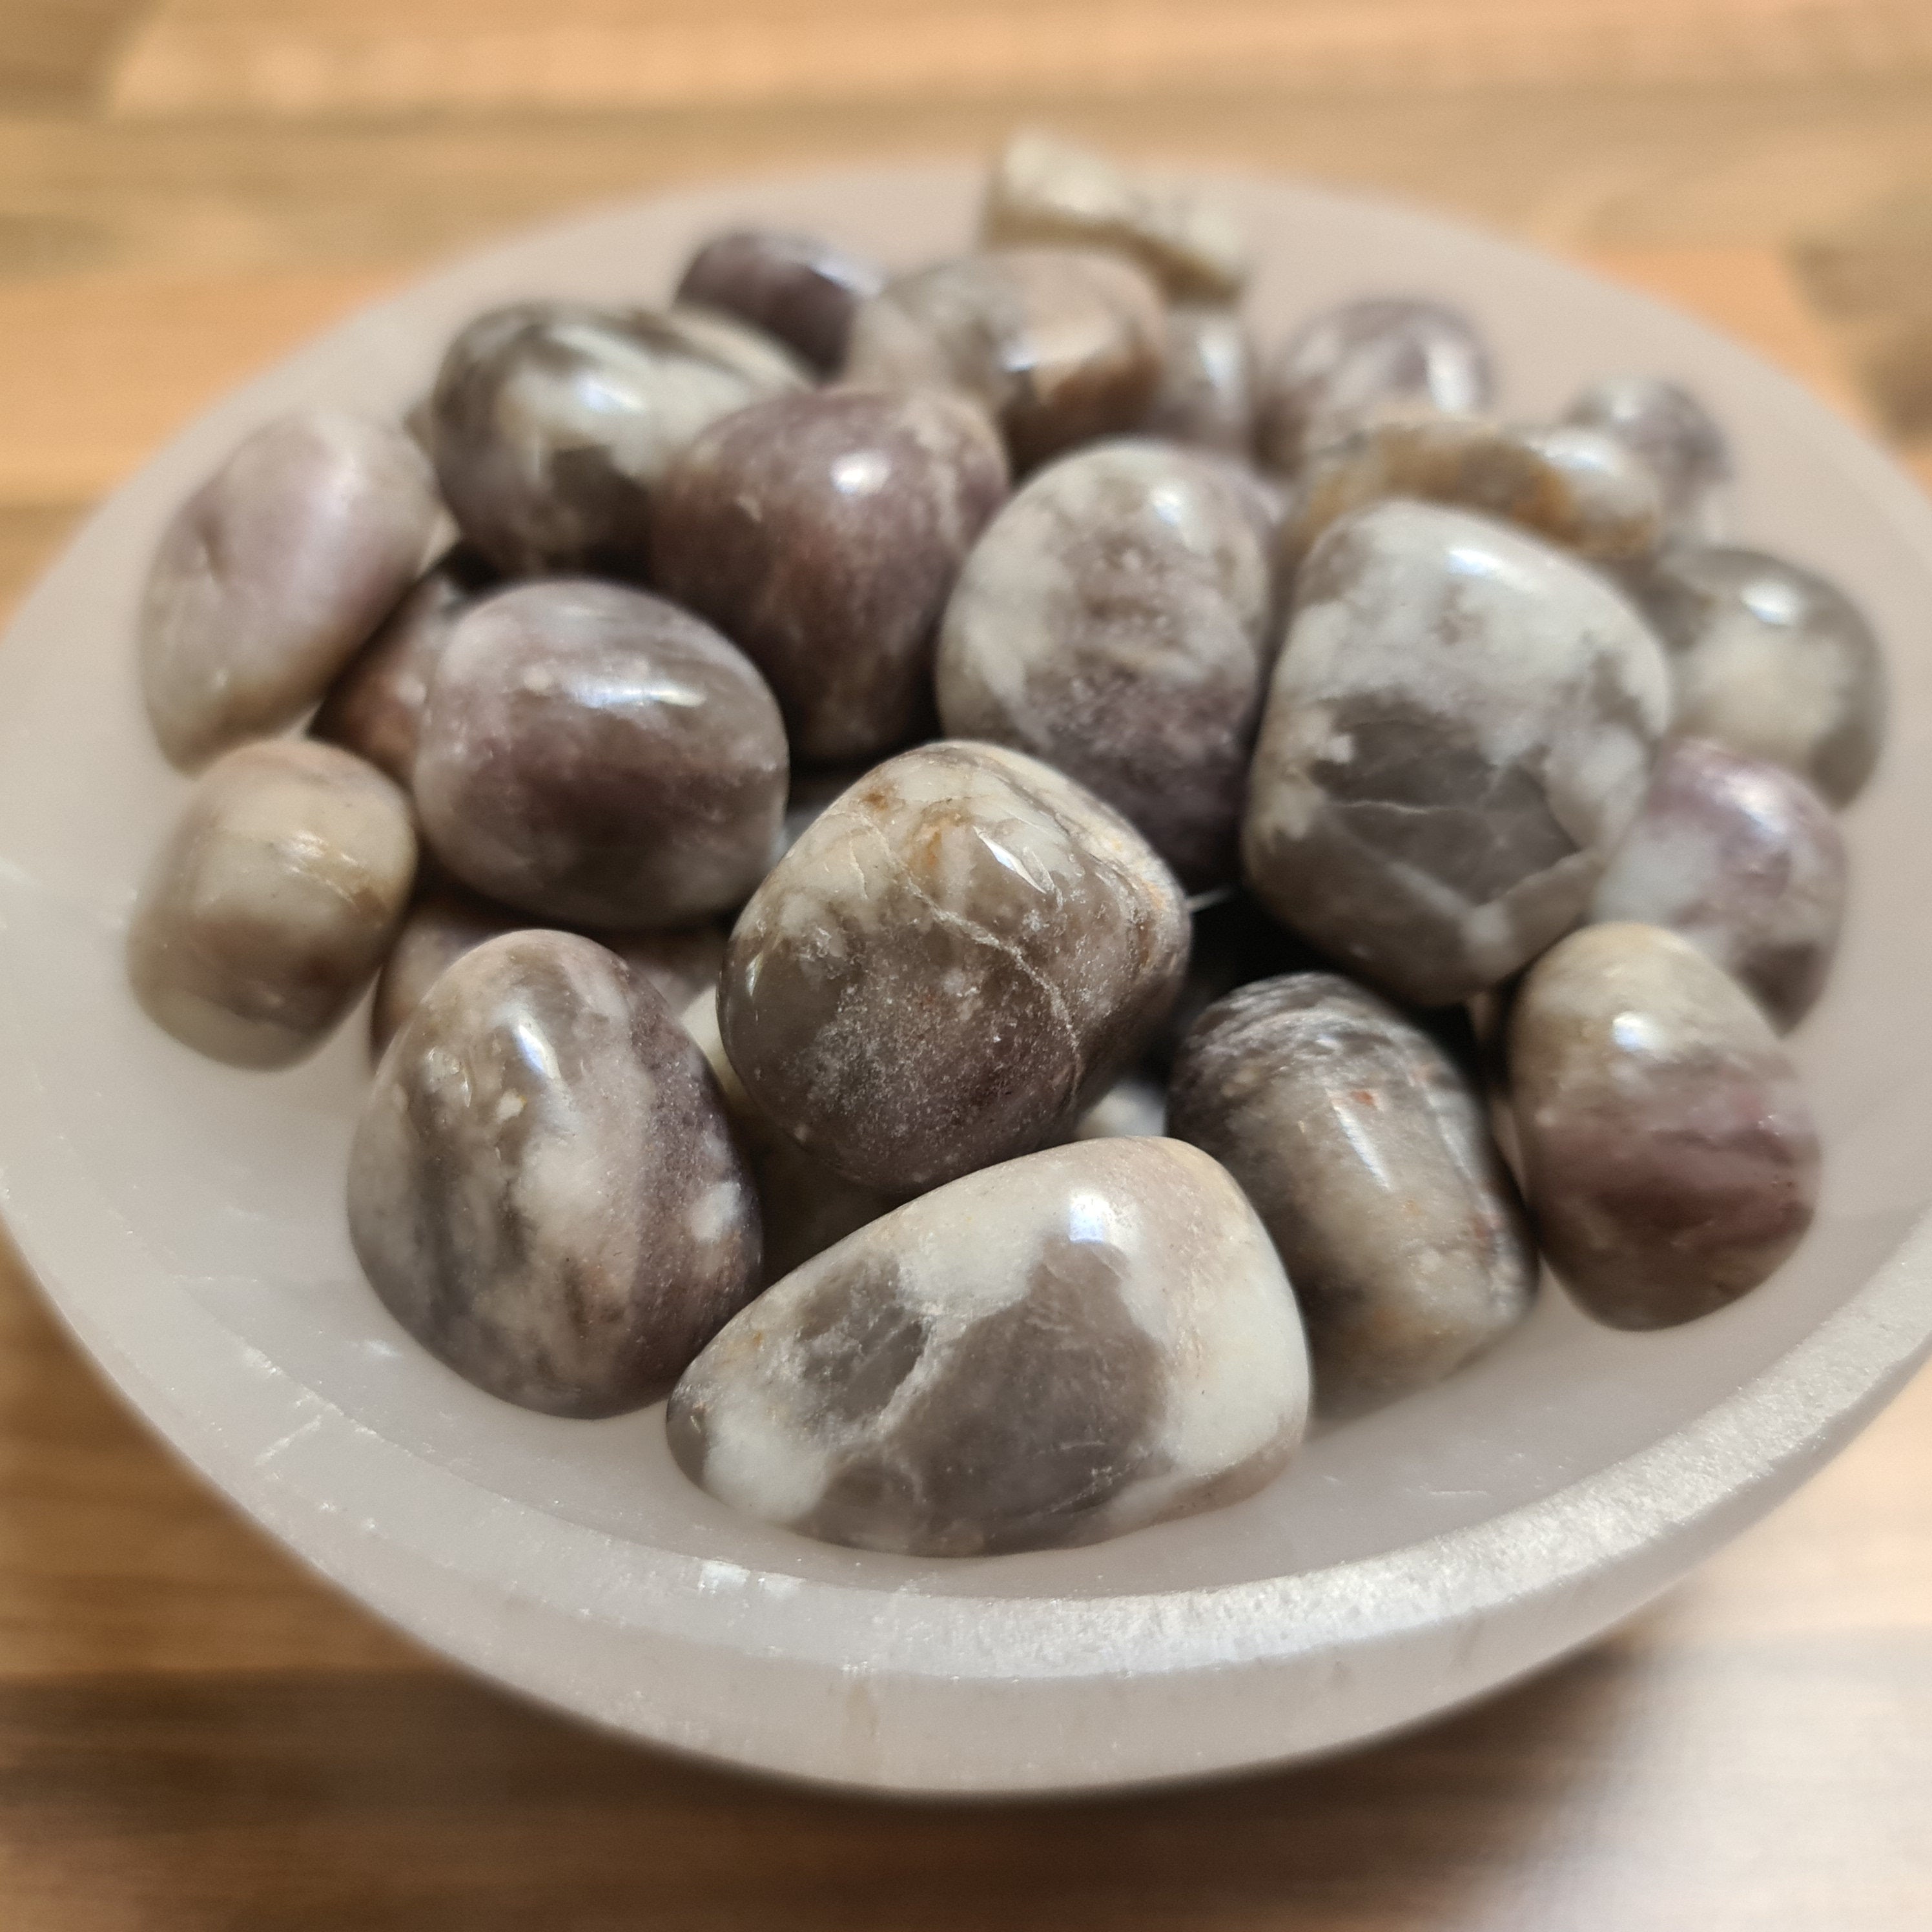 Lepidolite Crystal Tumbled Stones, Natural Lepidolite Tumblestones, Healing Crystal, Meditation, Depression and Anxiety, Gift